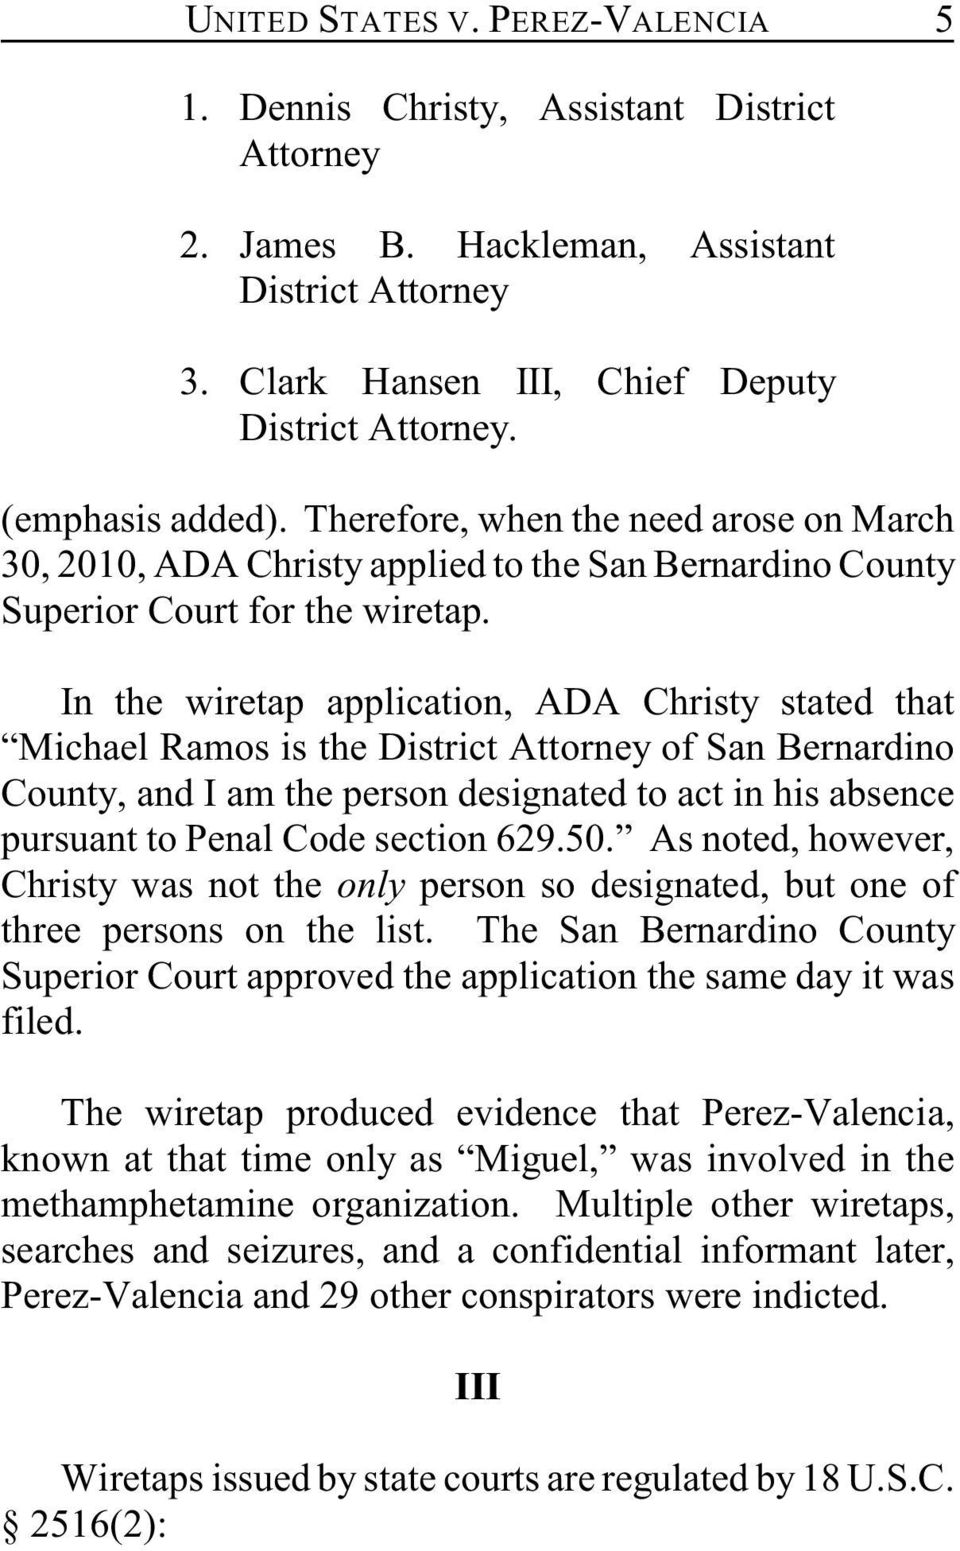 In the wiretap application, ADA Christy stated that Michael Ramos is the District Attorney of San Bernardino County, and I am the person designated to act in his absence pursuant to Penal Code